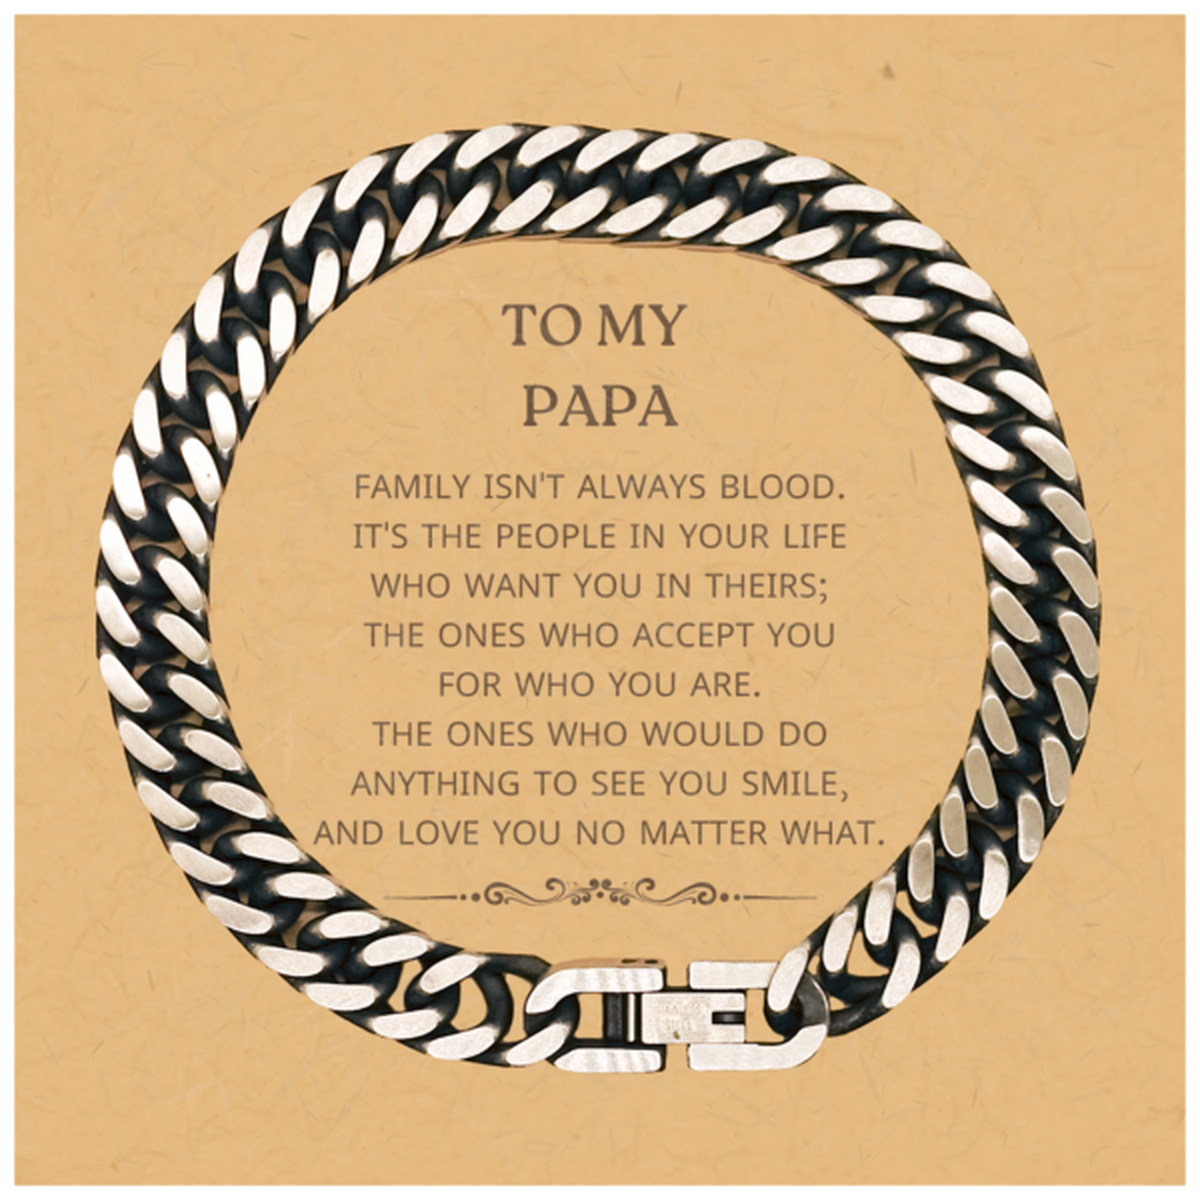 To My Papa Gifts, Family isn't always blood, Papa Cuban Link Chain Bracelet, Birthday Christmas Unique Present For Papa